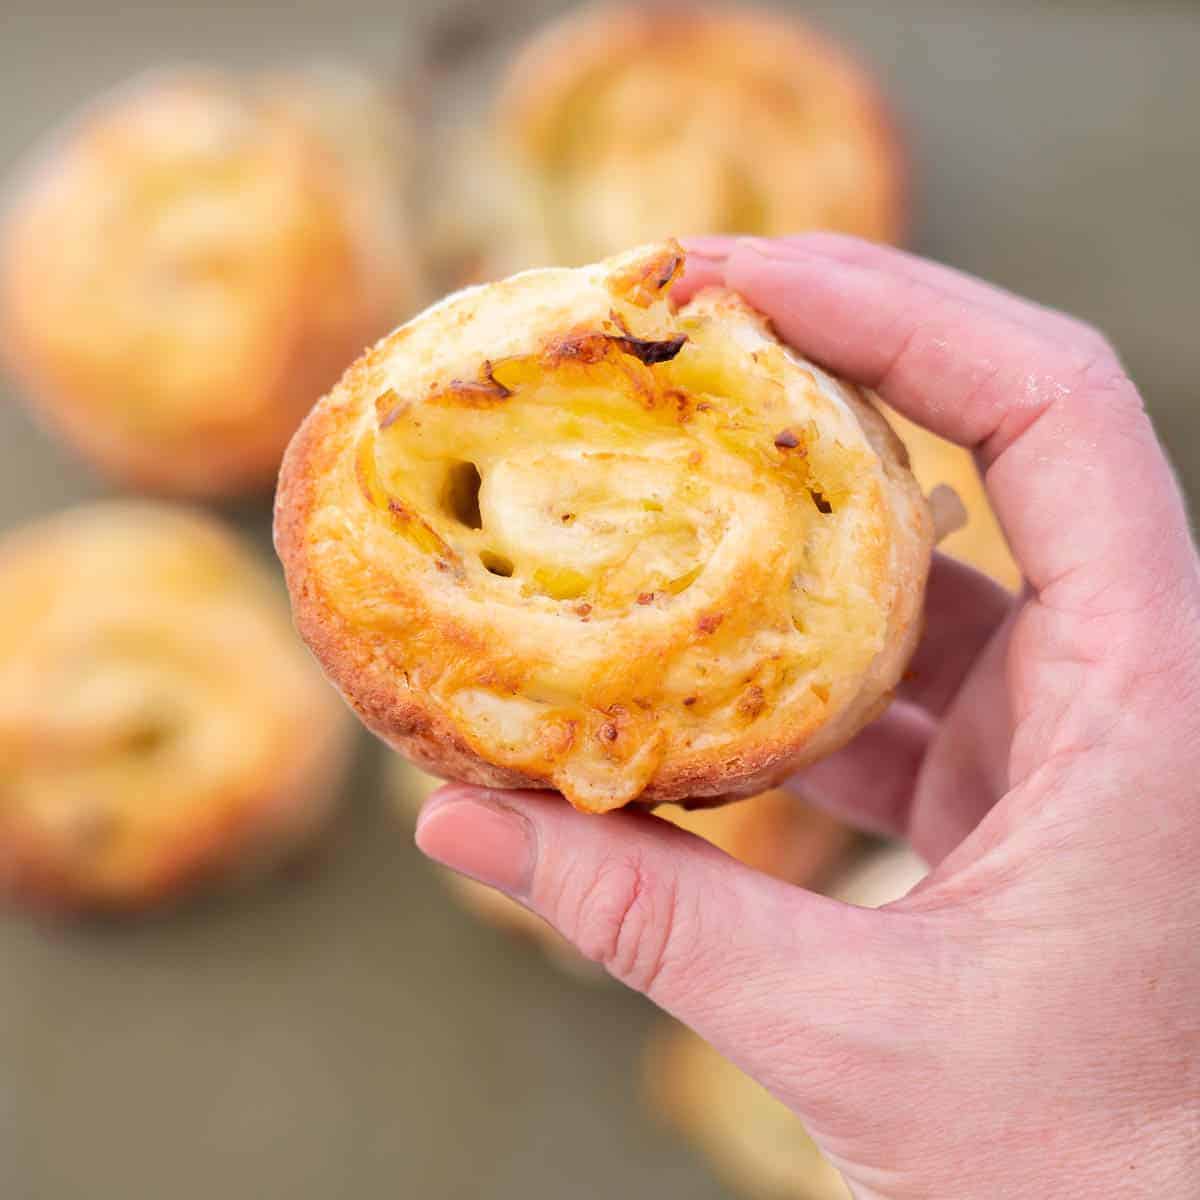 A golden baked pinwheel being held up to the camera.